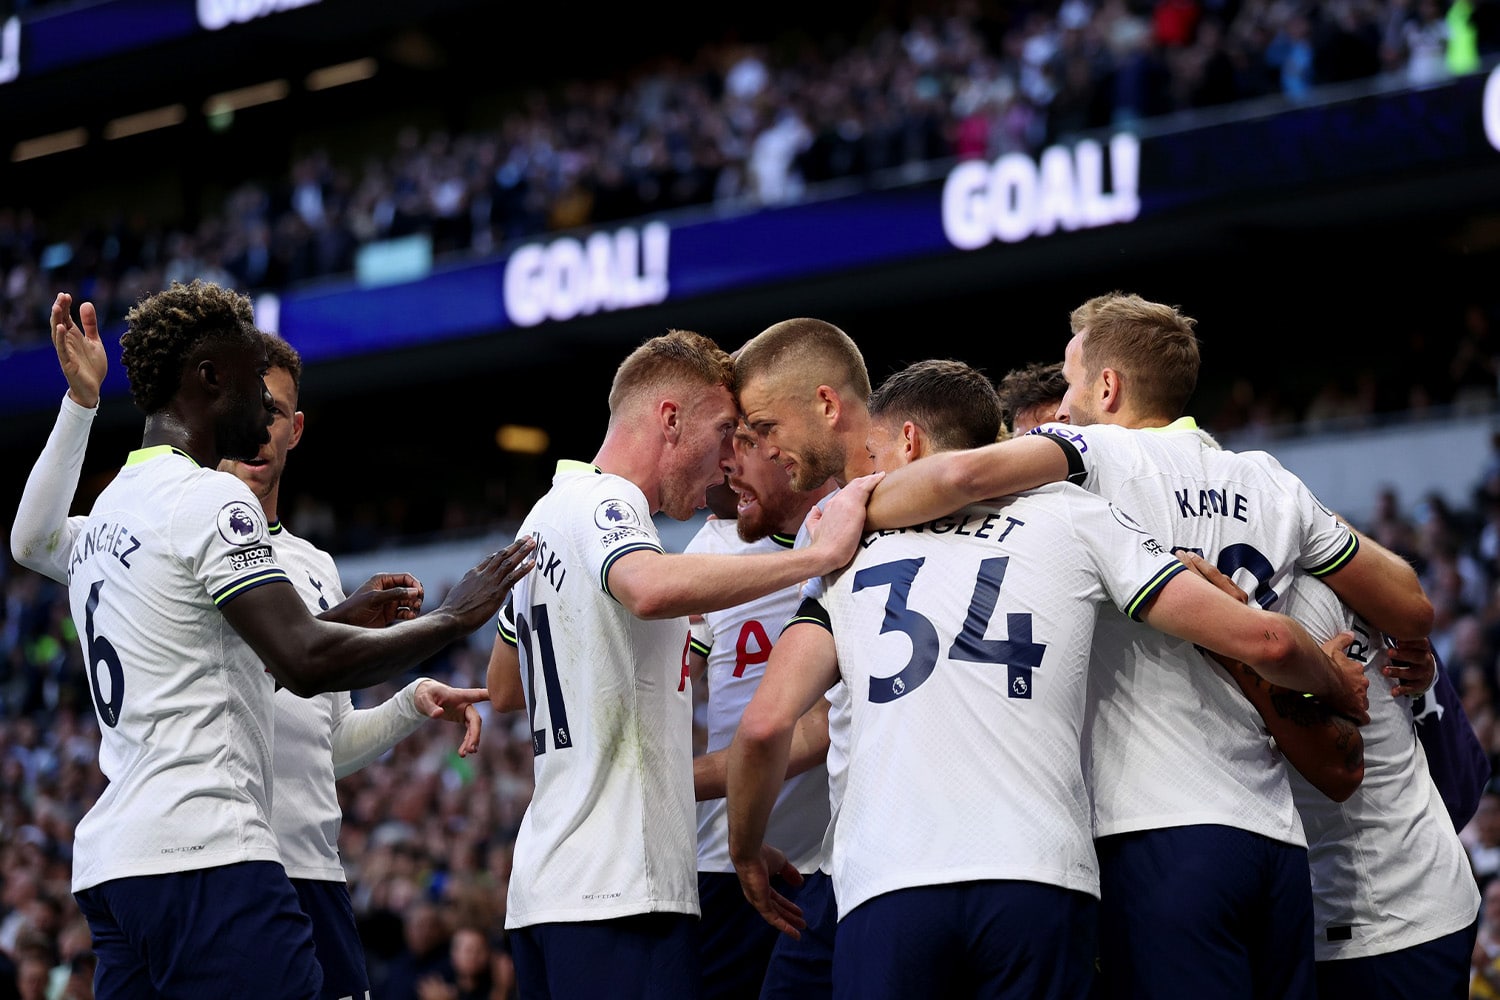 Tottenham Hotspur FC players celebrate together after a goal.